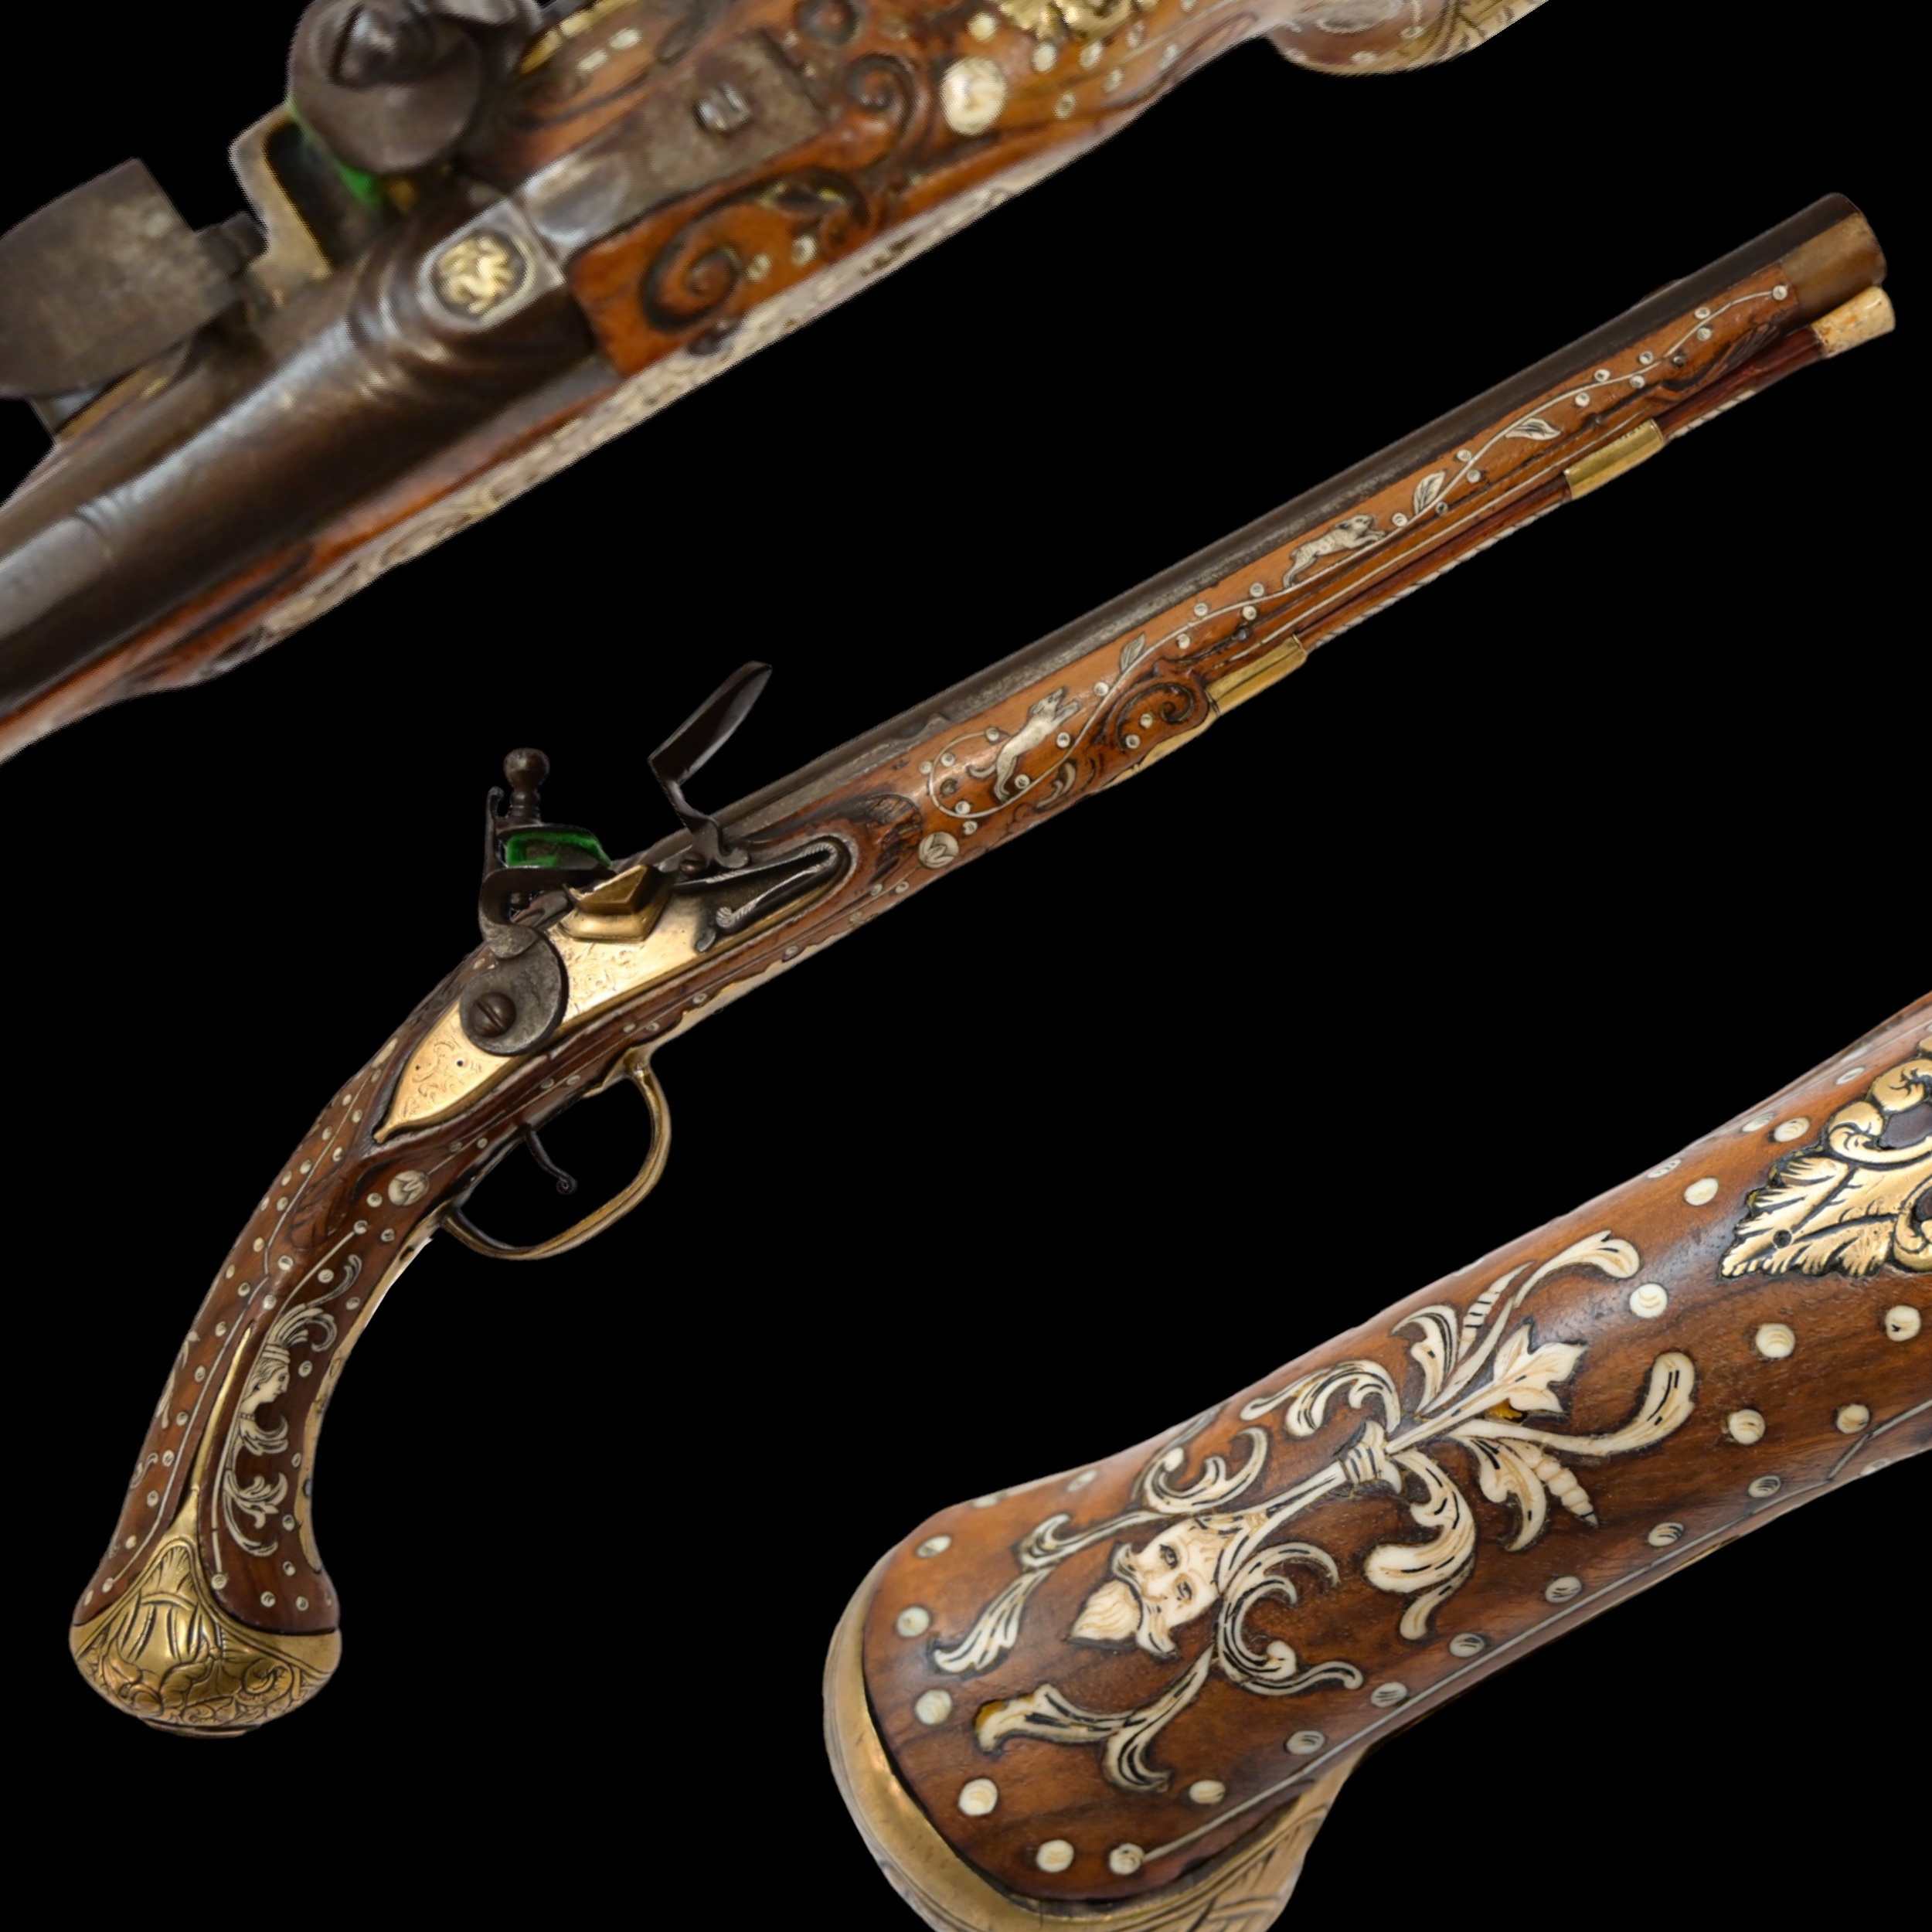 Rare, Richly decorated with inlay, flintlock pistol, Germany, last quarter of the 17th century.